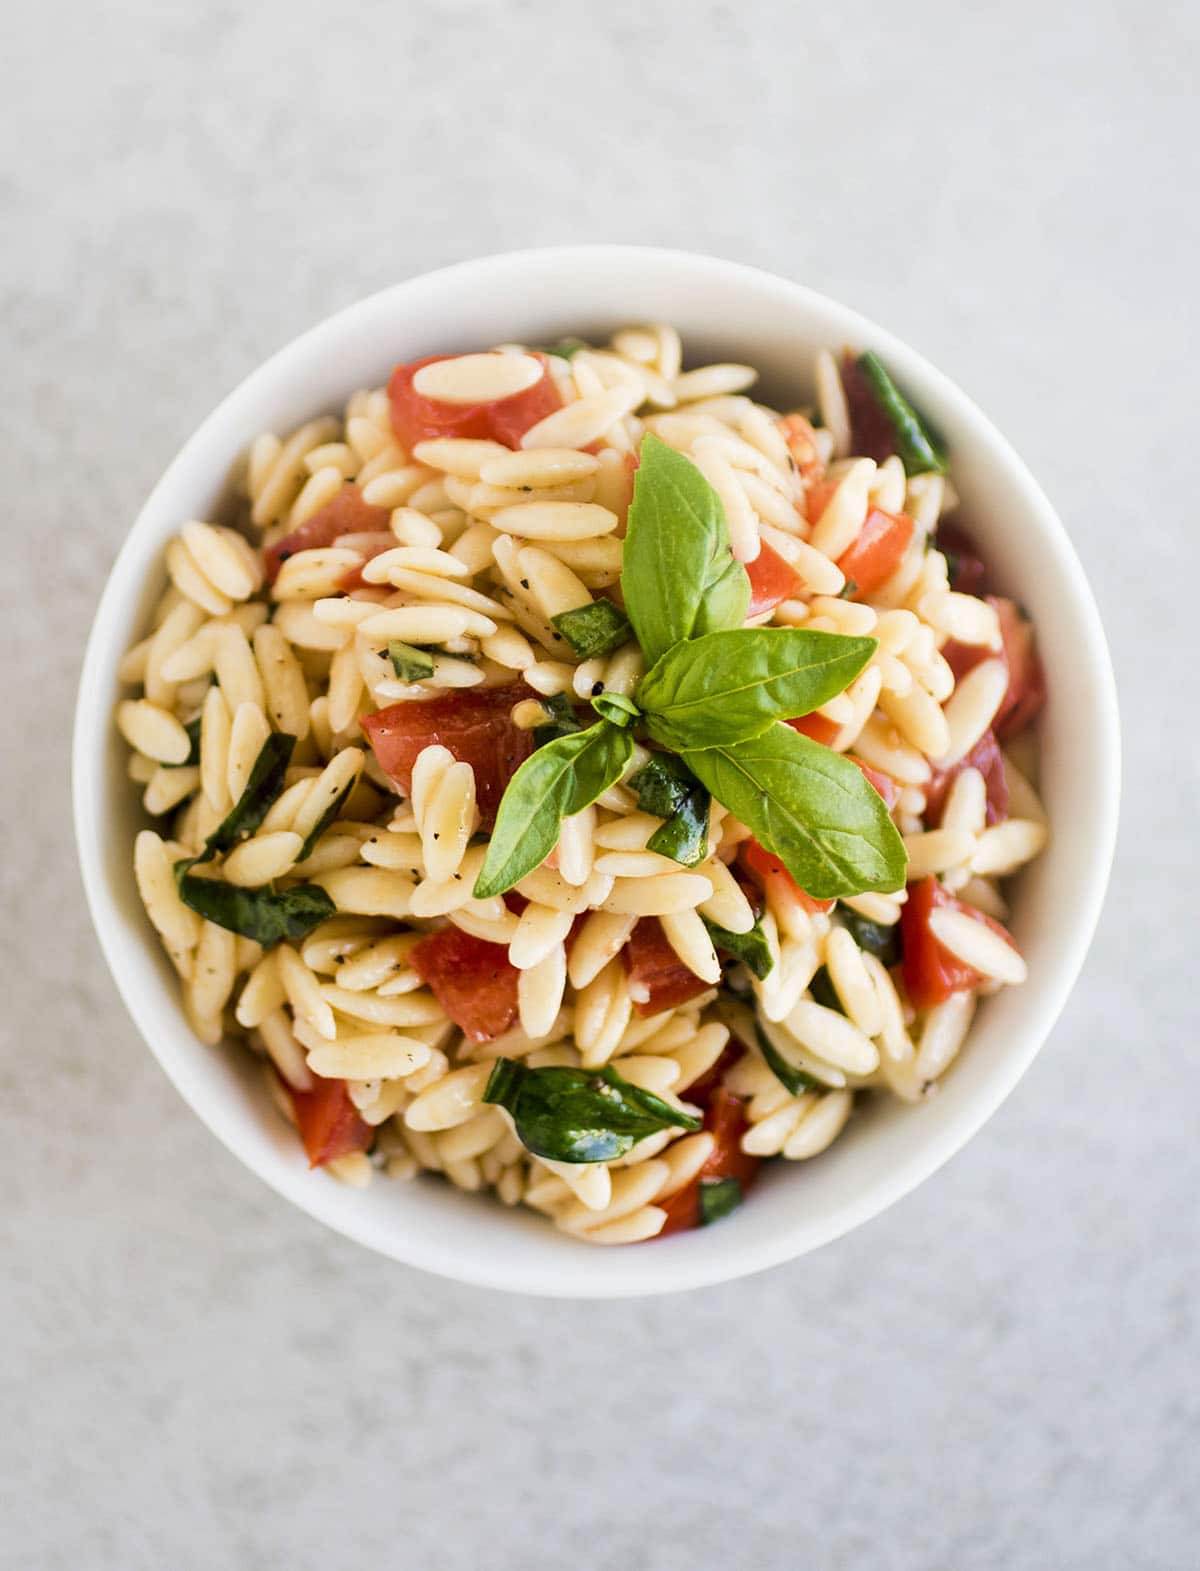 Orzo pasta salad in a shallow white bowl.